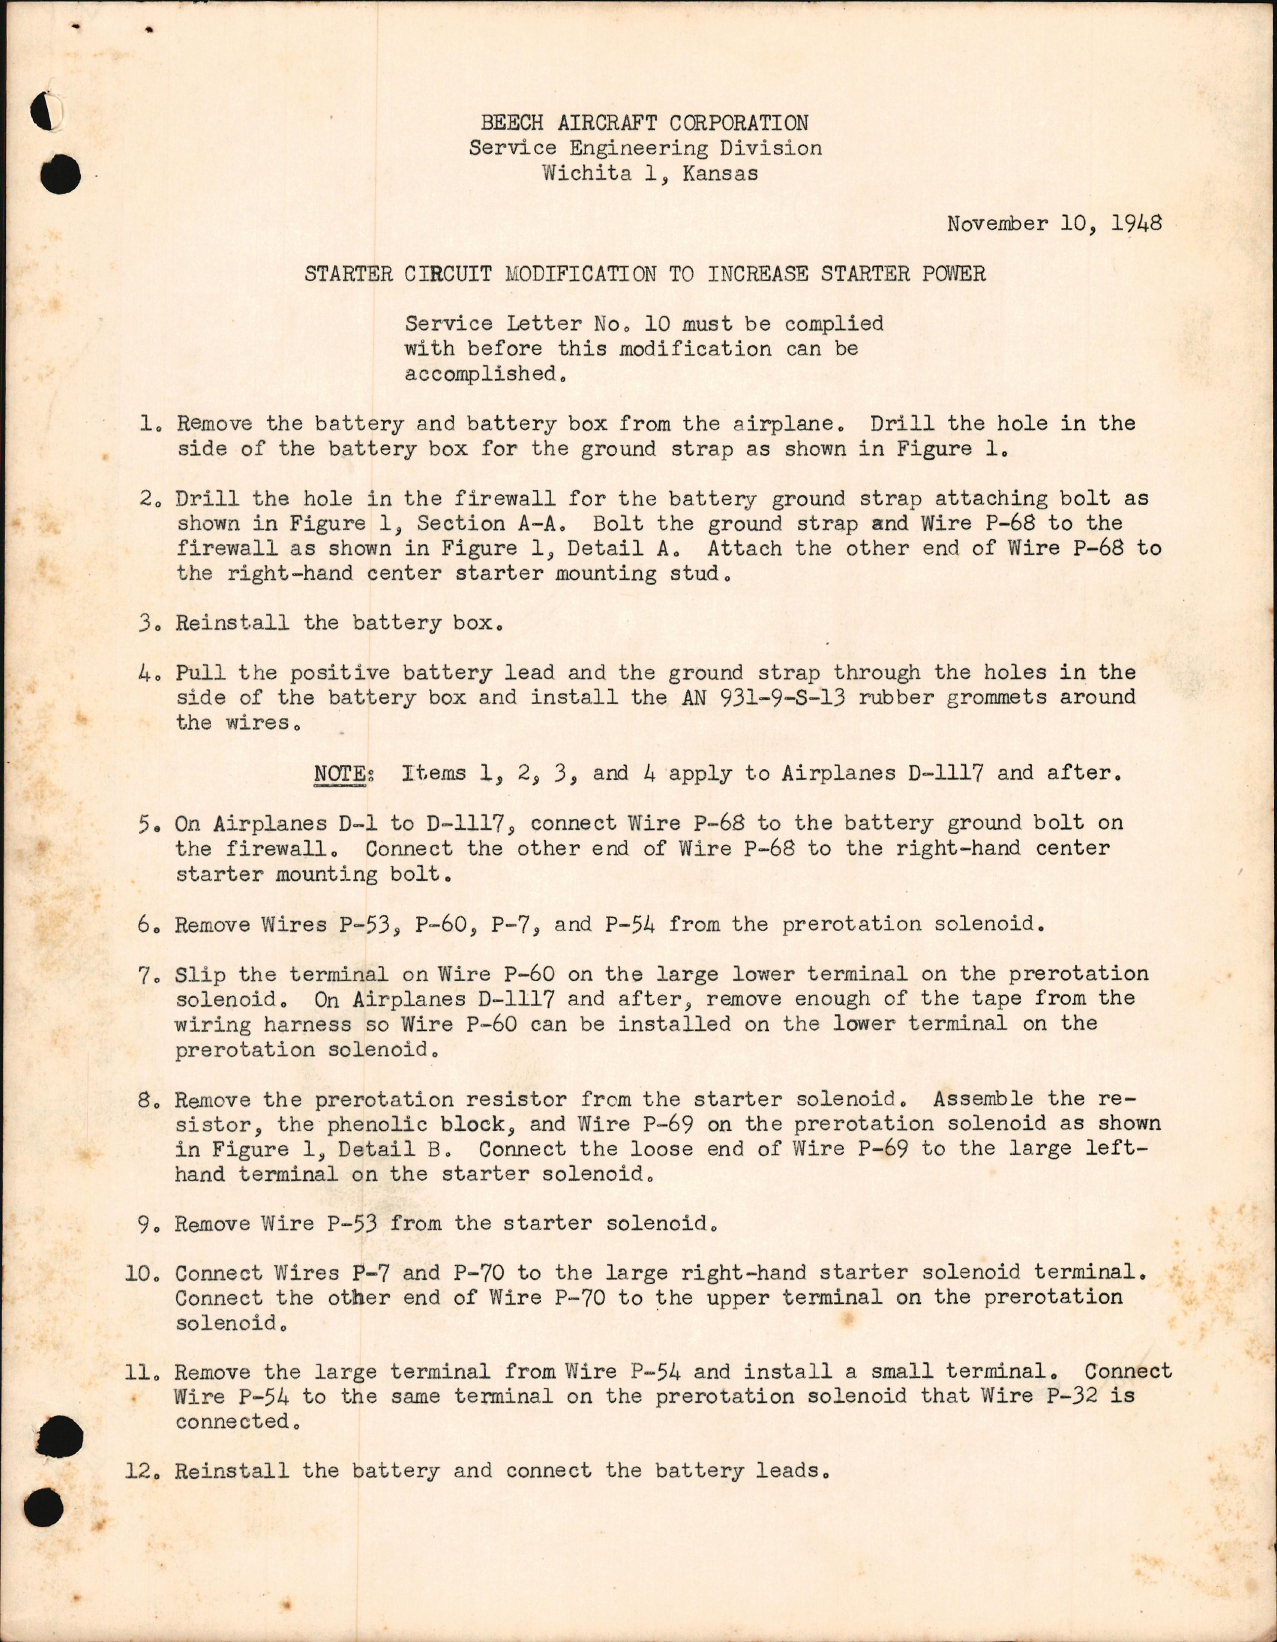 Sample page 1 from AirCorps Library document: Service Letter, Starter Circuit Modification to Increase Starter Power